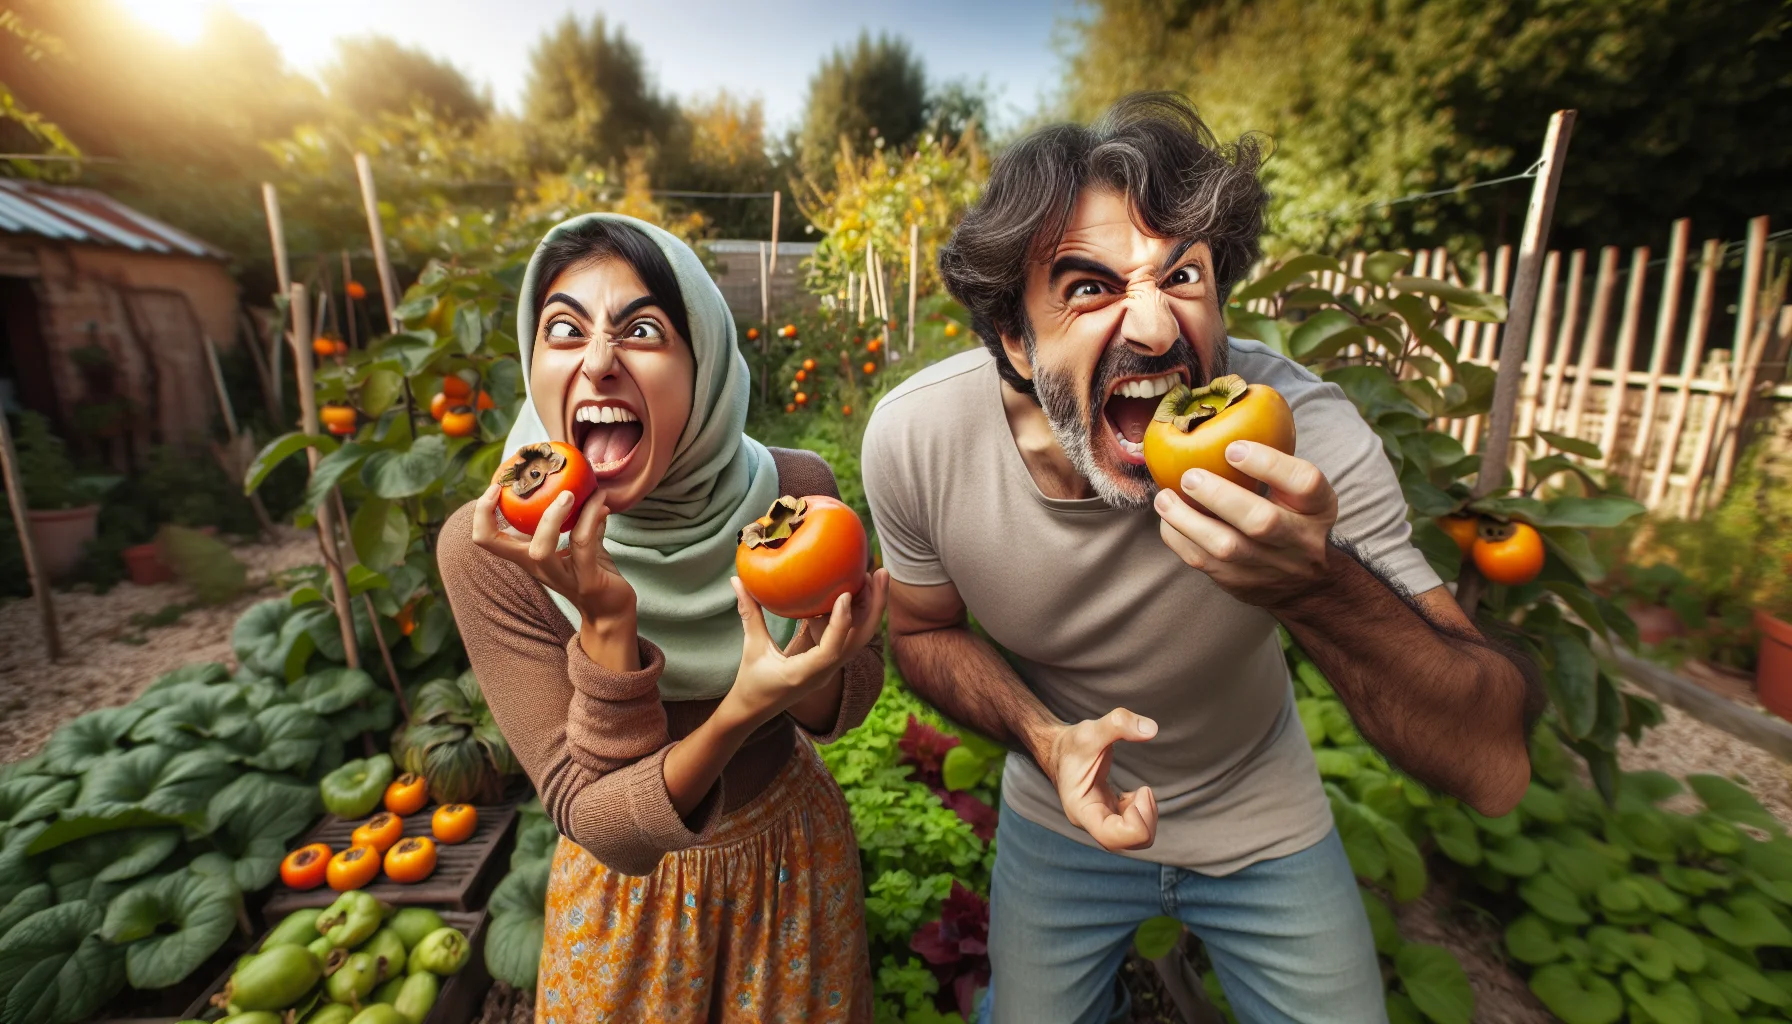 Imagine a scene that is both amusing and promotes an enthusiasm for gardening. In the foreground of a lush garden filled with diverse, thriving plants, there's a Middle-Eastern woman and a Hispanic man. They are animatedly demonstrating how to eat a persimmon. Each of them has a differently colored persimmon, one ripe orange and the other golden yellow. The woman is trying to gracefully bite into hers while the man is making a goofy face as he takes a giant bite. There's a playful twinkle in their eyes, reflecting the fun and joy in enjoying the fruits of their gardening labor.